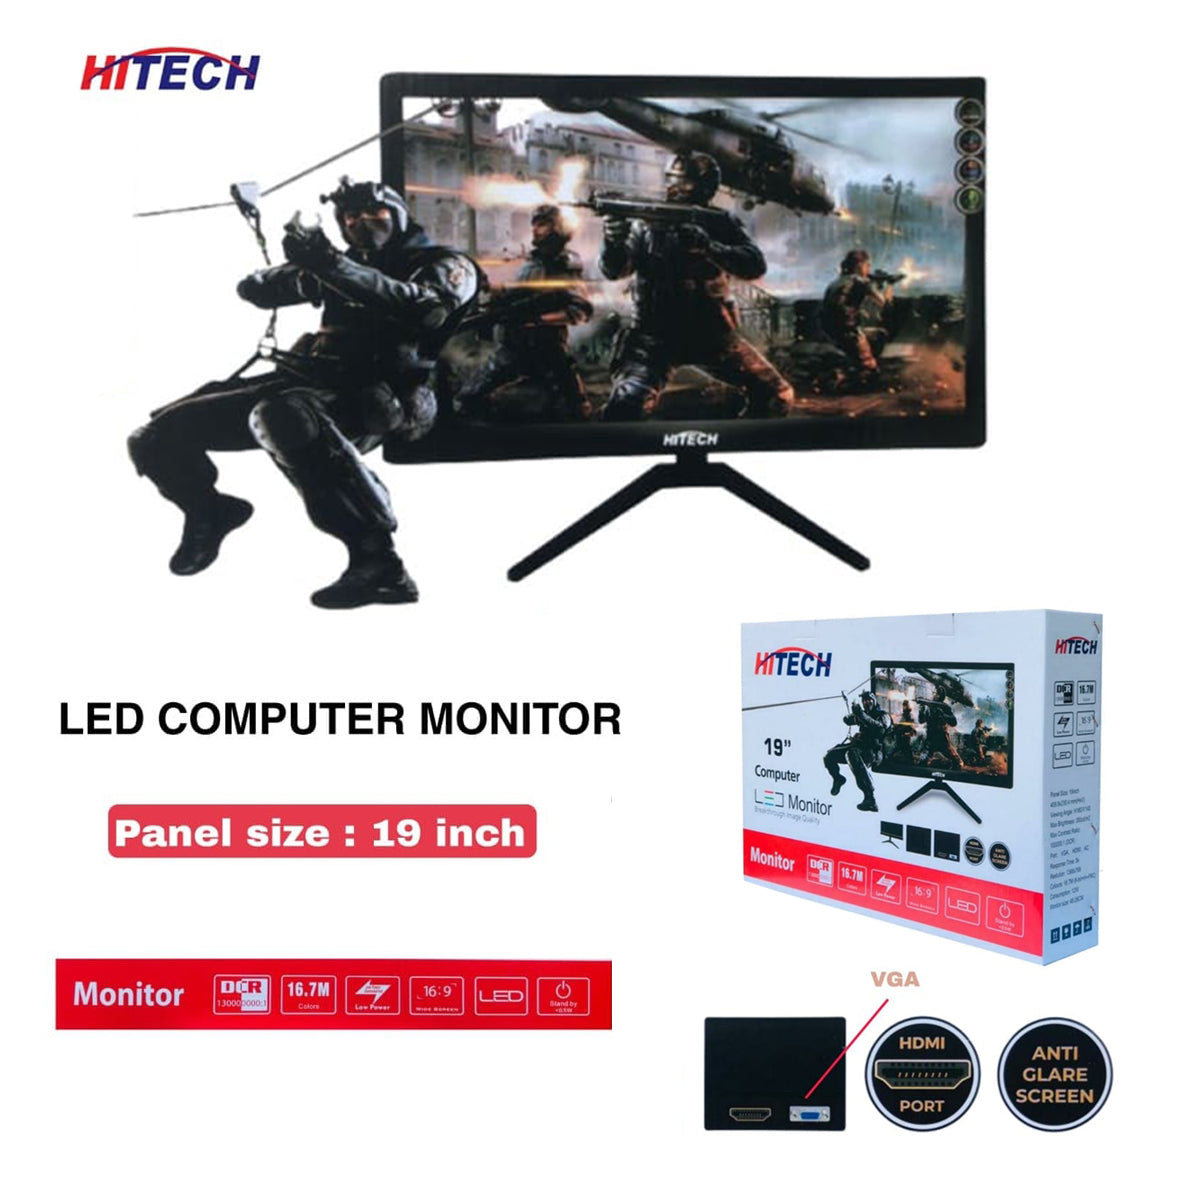 Hitech LED Computer  Monitor 19"  Inch  Quality and Design - Brother-mart